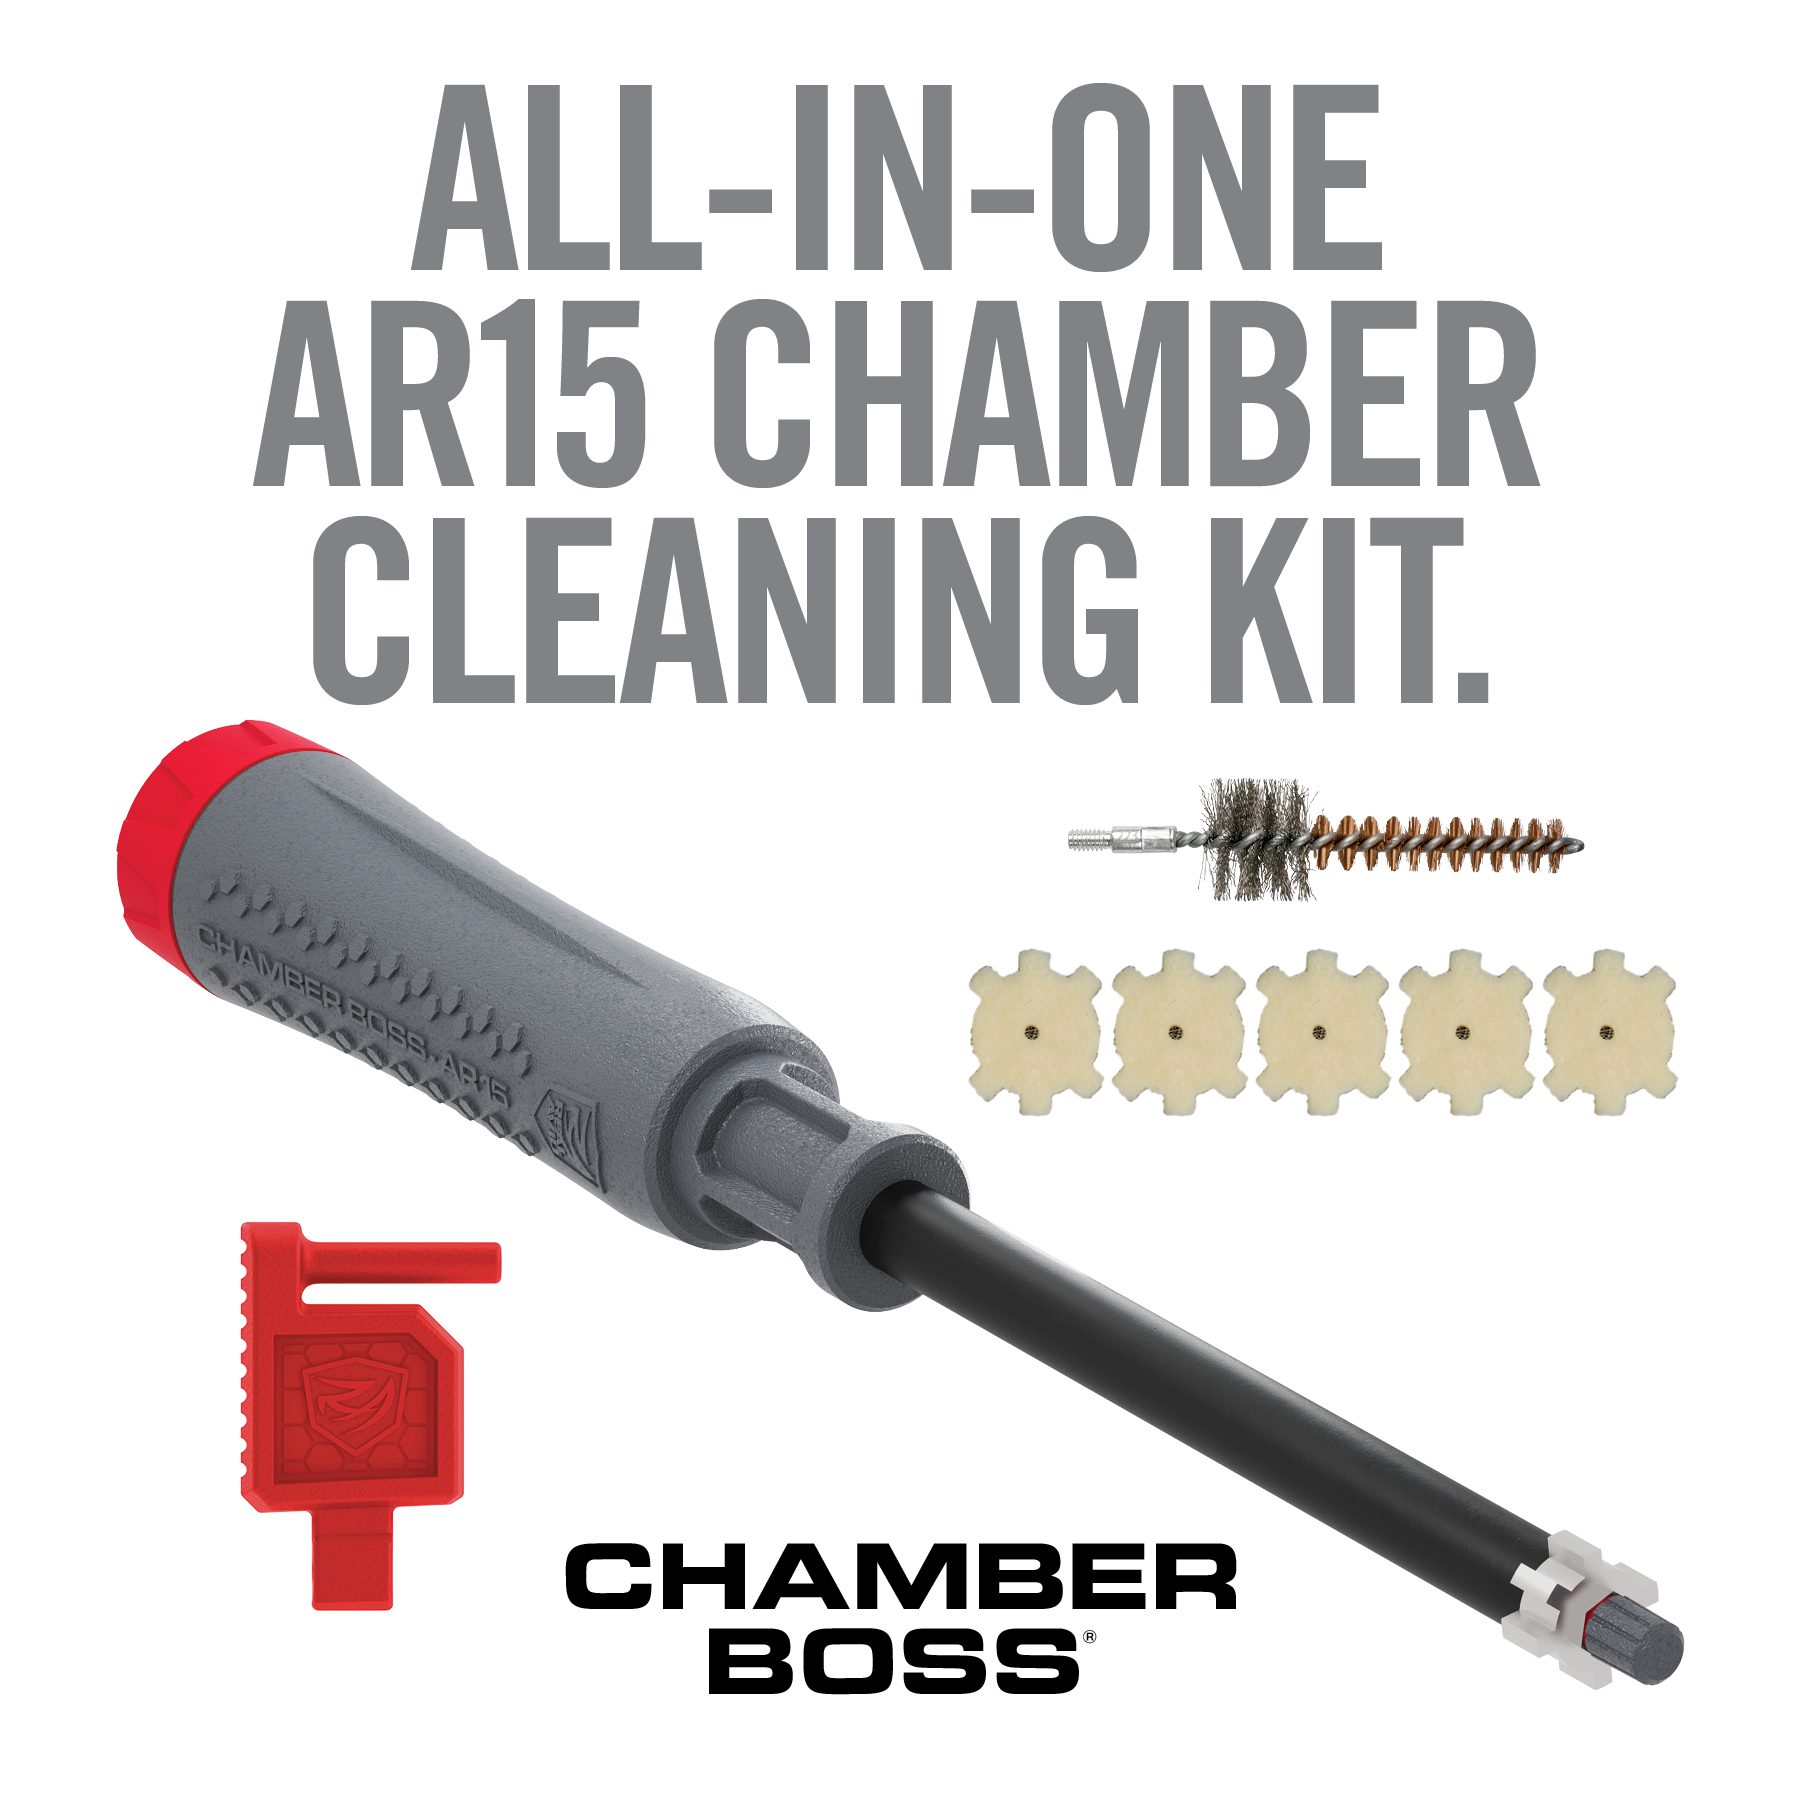 the all - in - one ar15 chamber cleaning kit